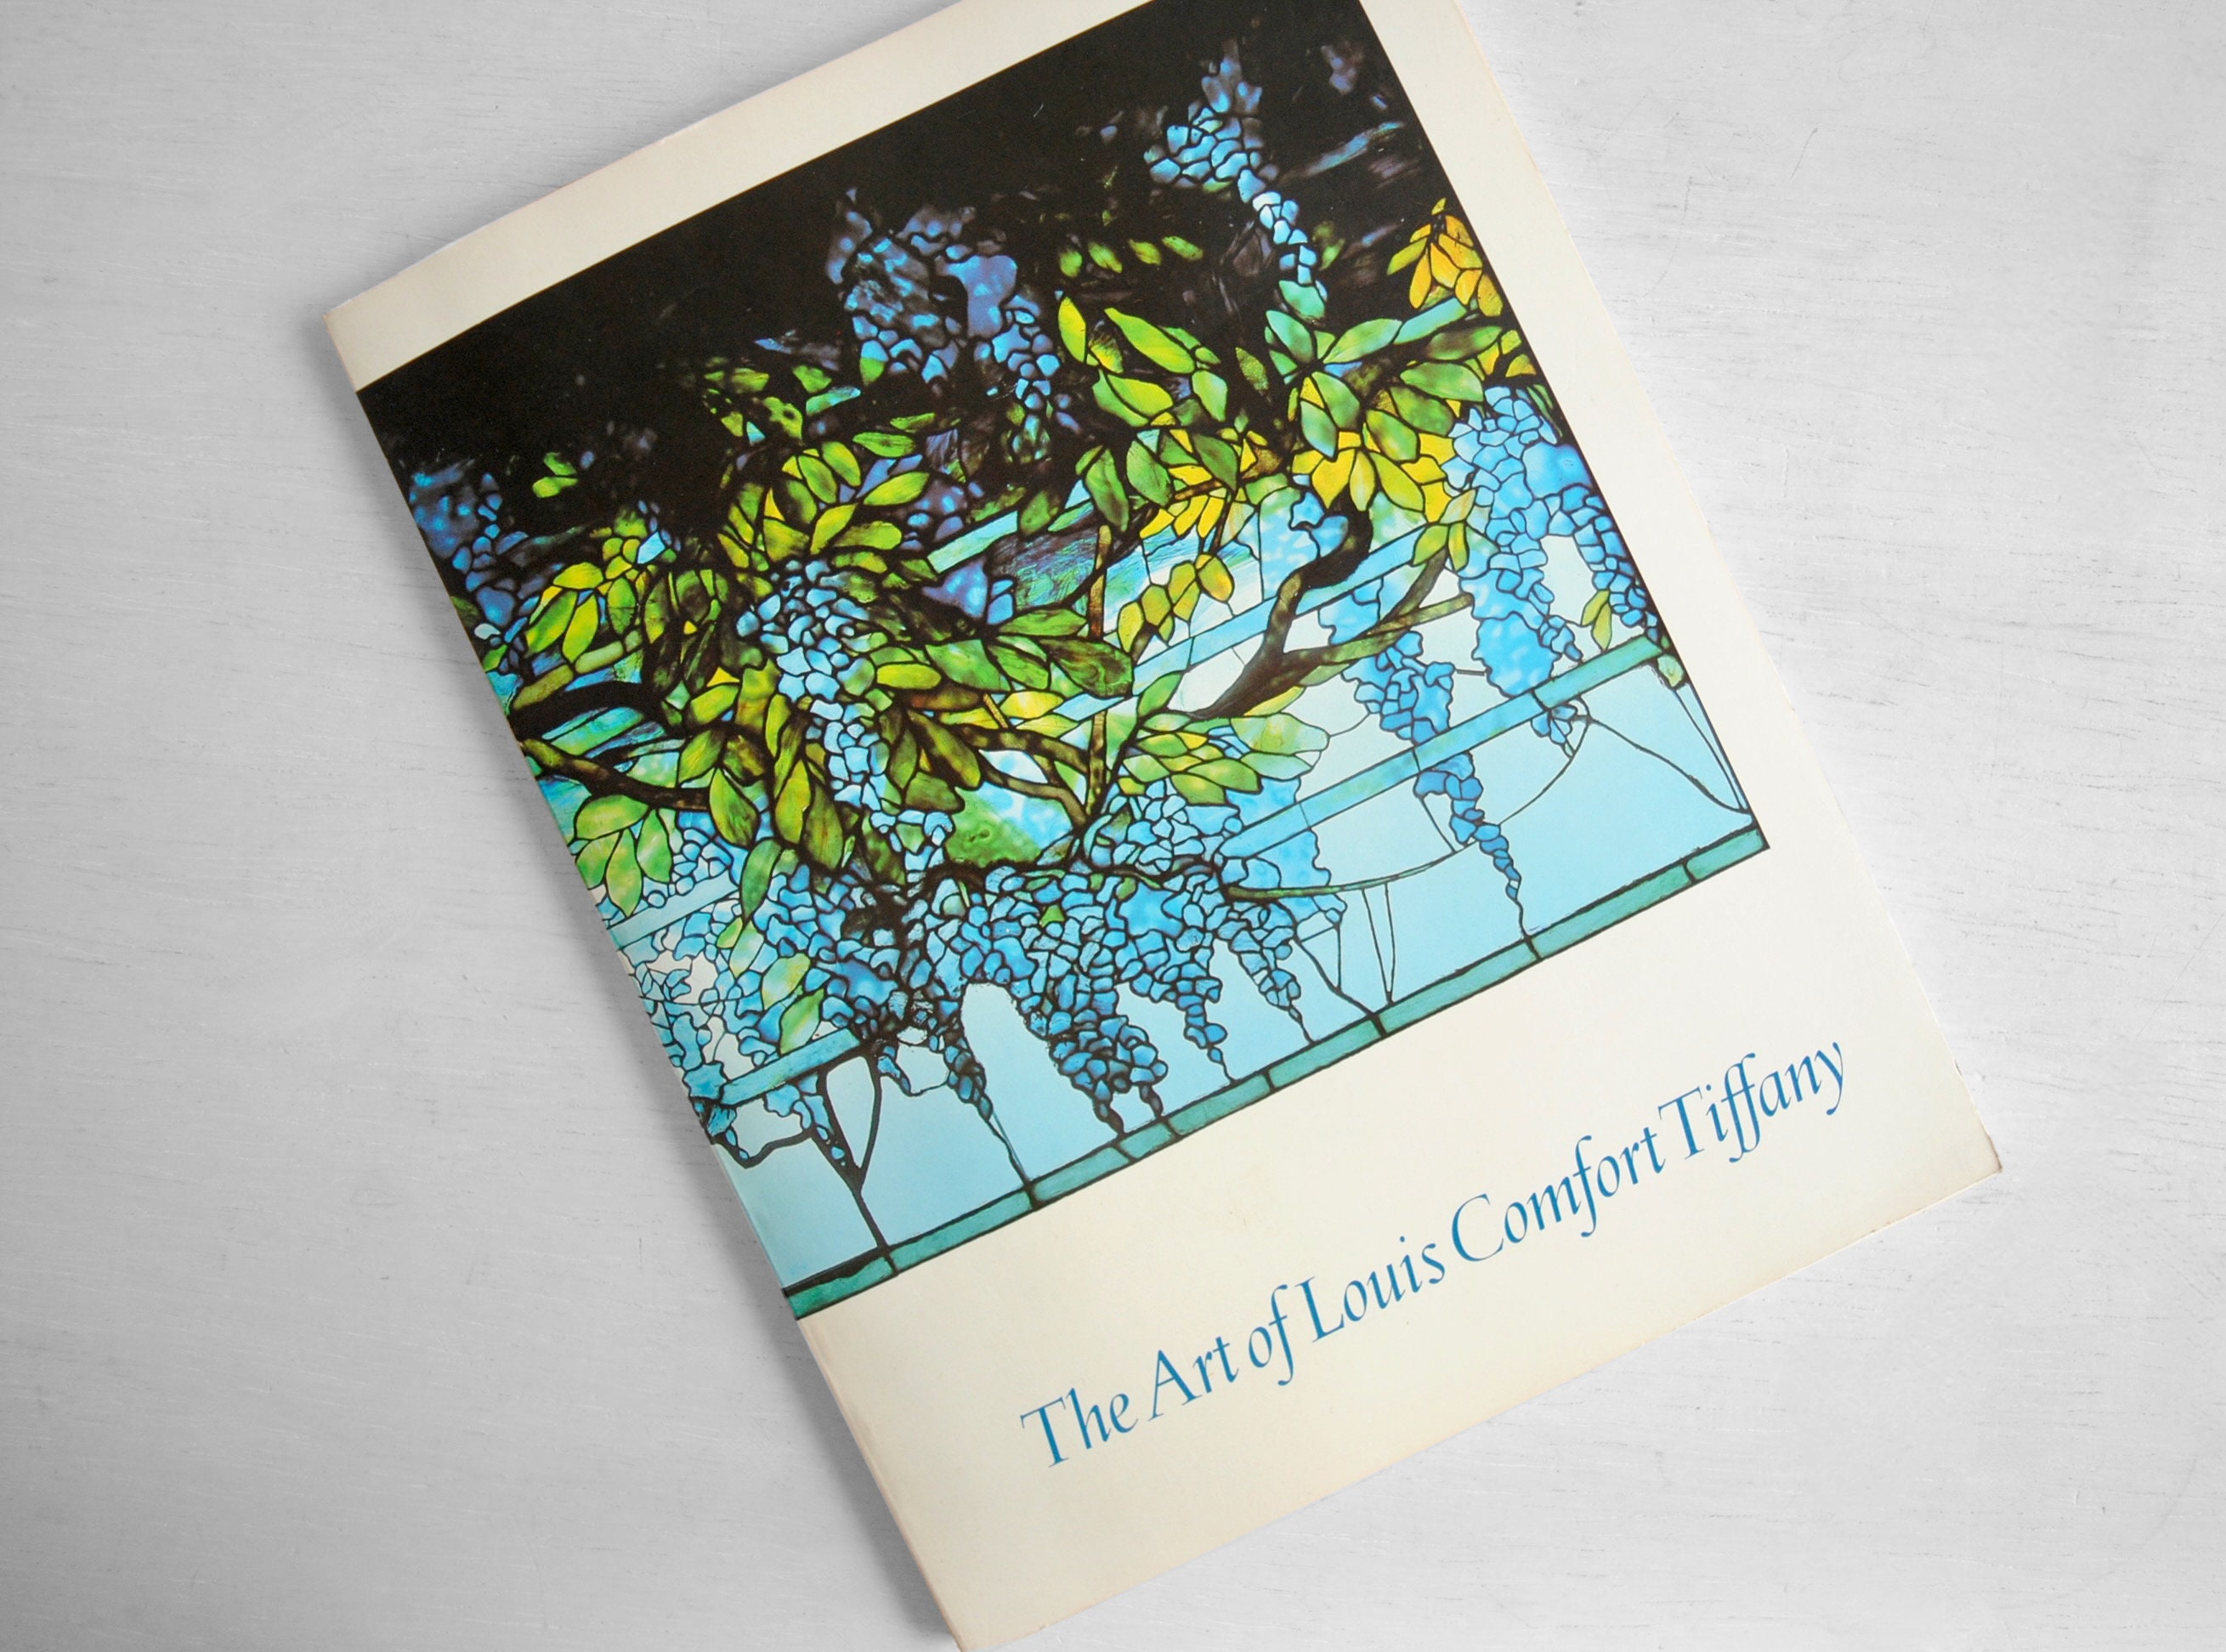 The Art of Louis Comfort Tiffany by Donald L. Stover ©1981 